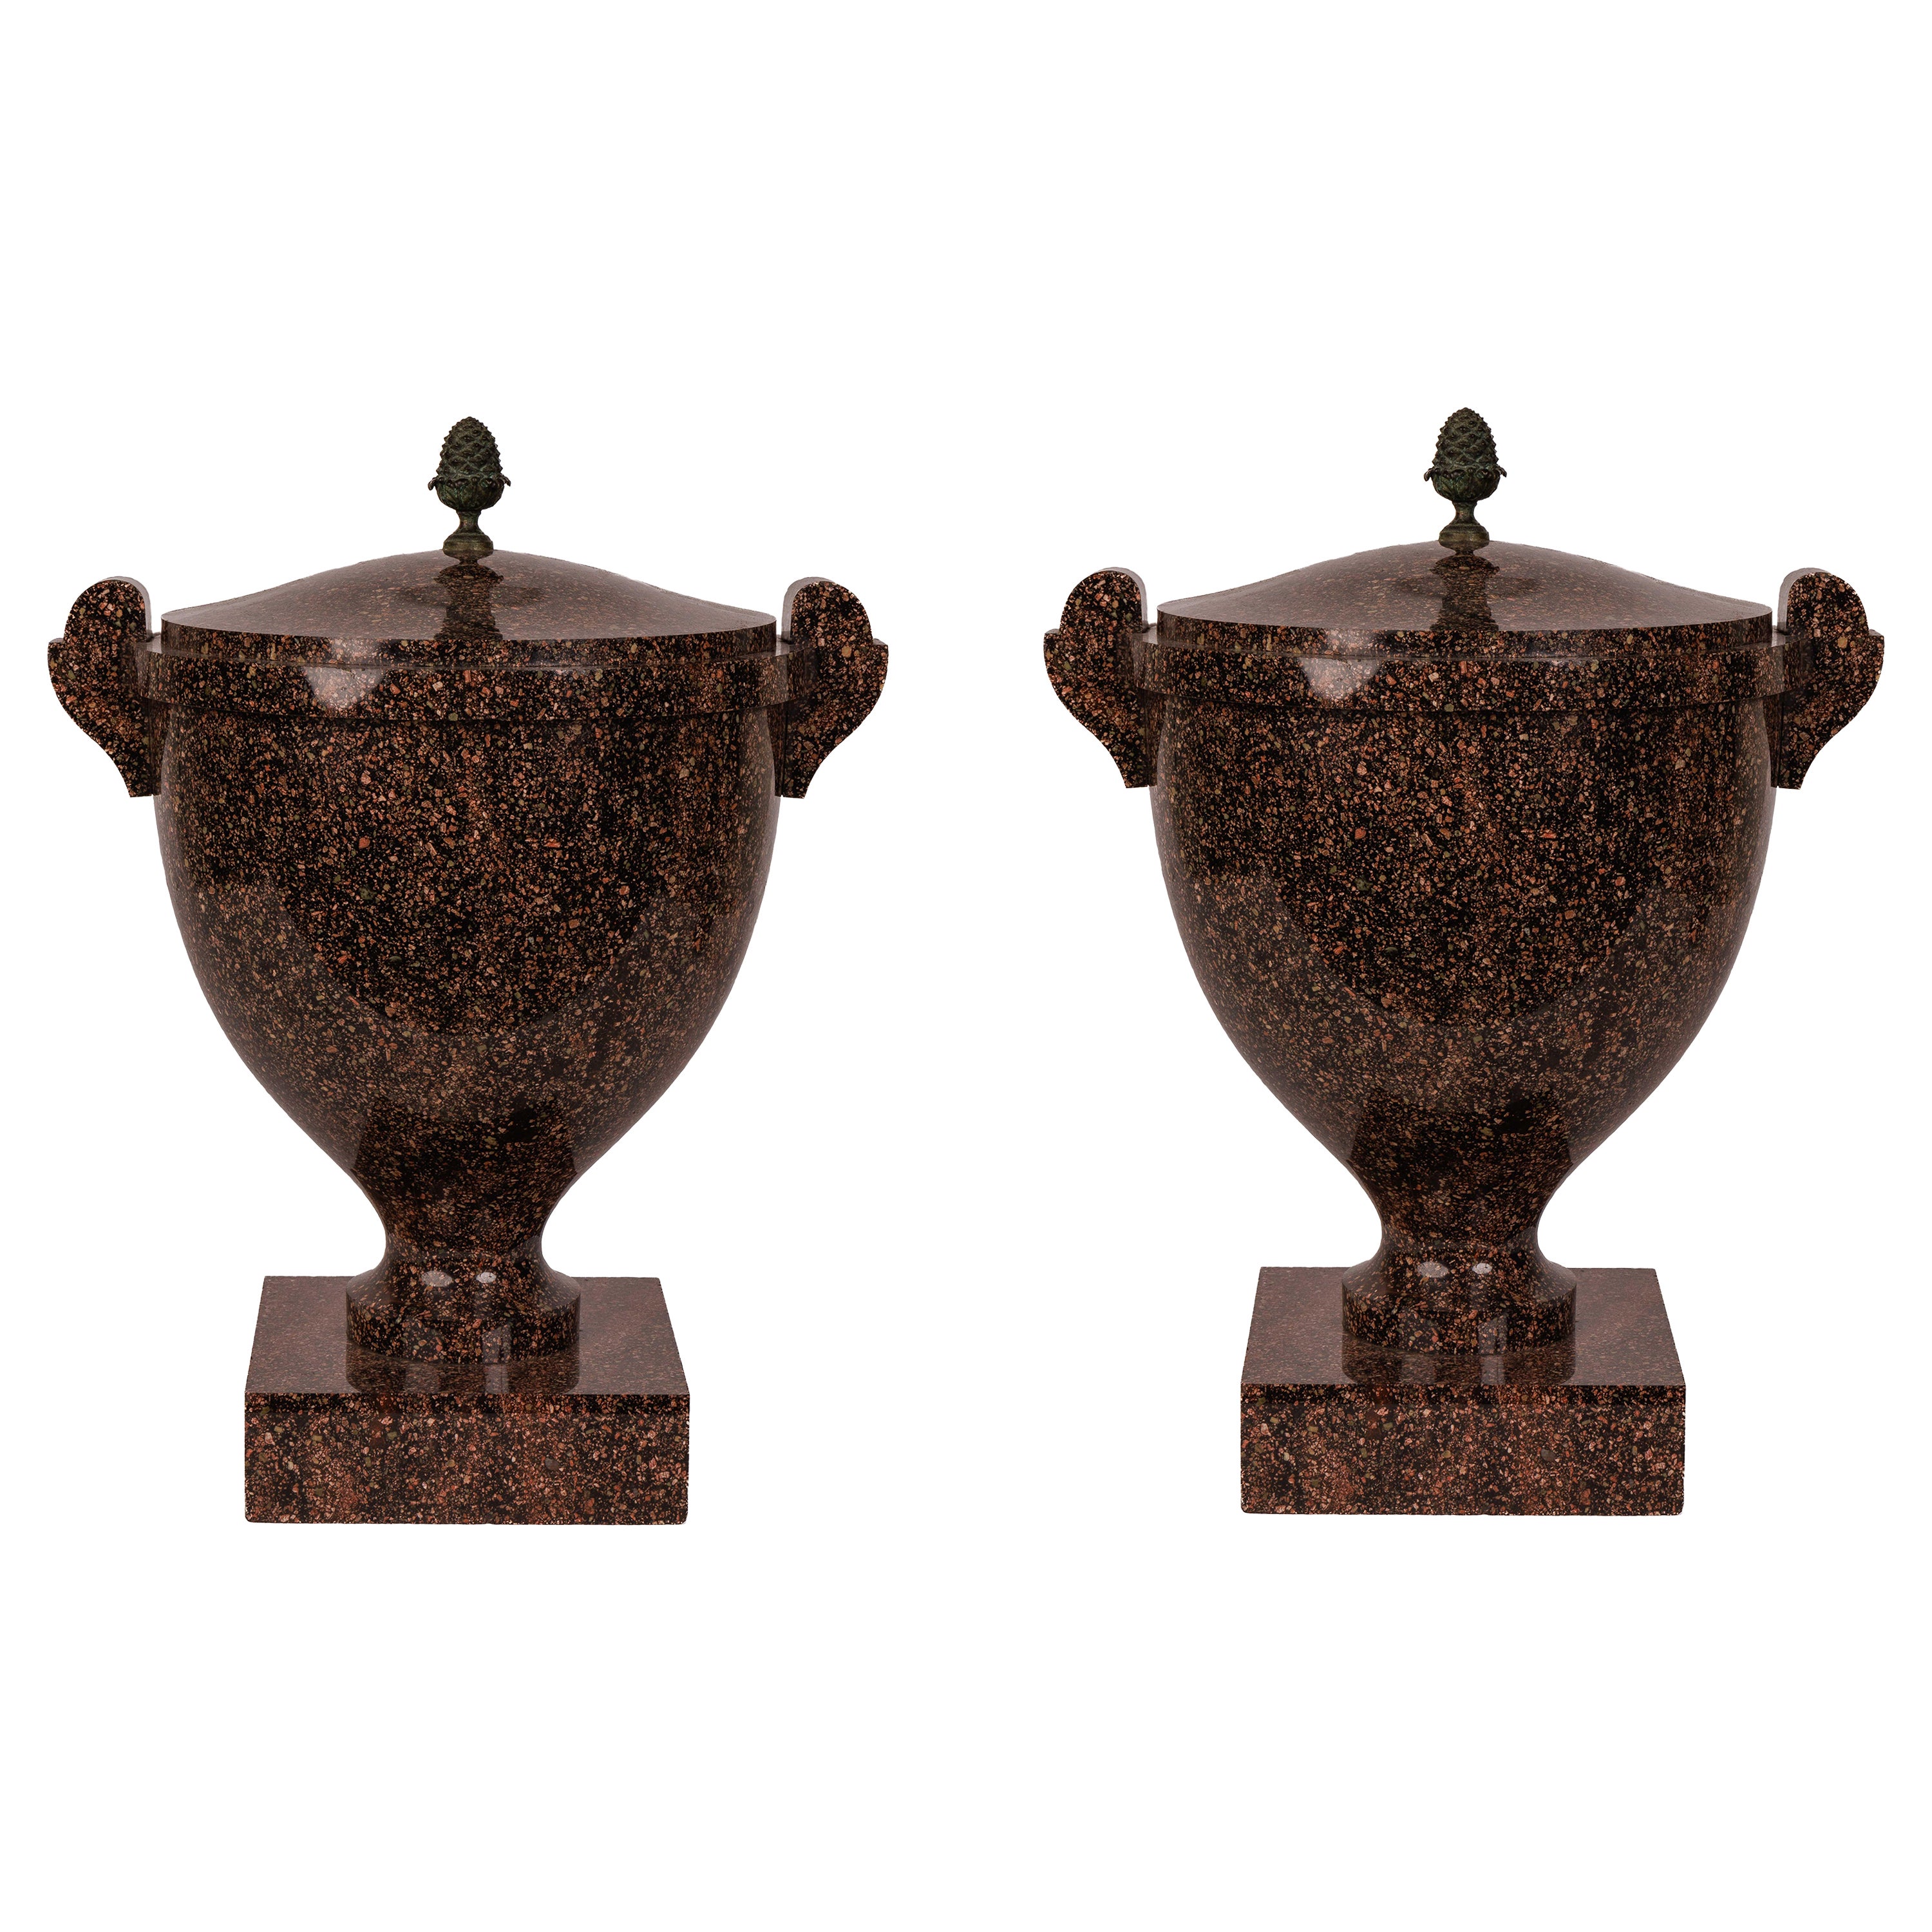 Large Pair of Swedish Blyberg Porphyry Vases and Covers, Early 19th Century